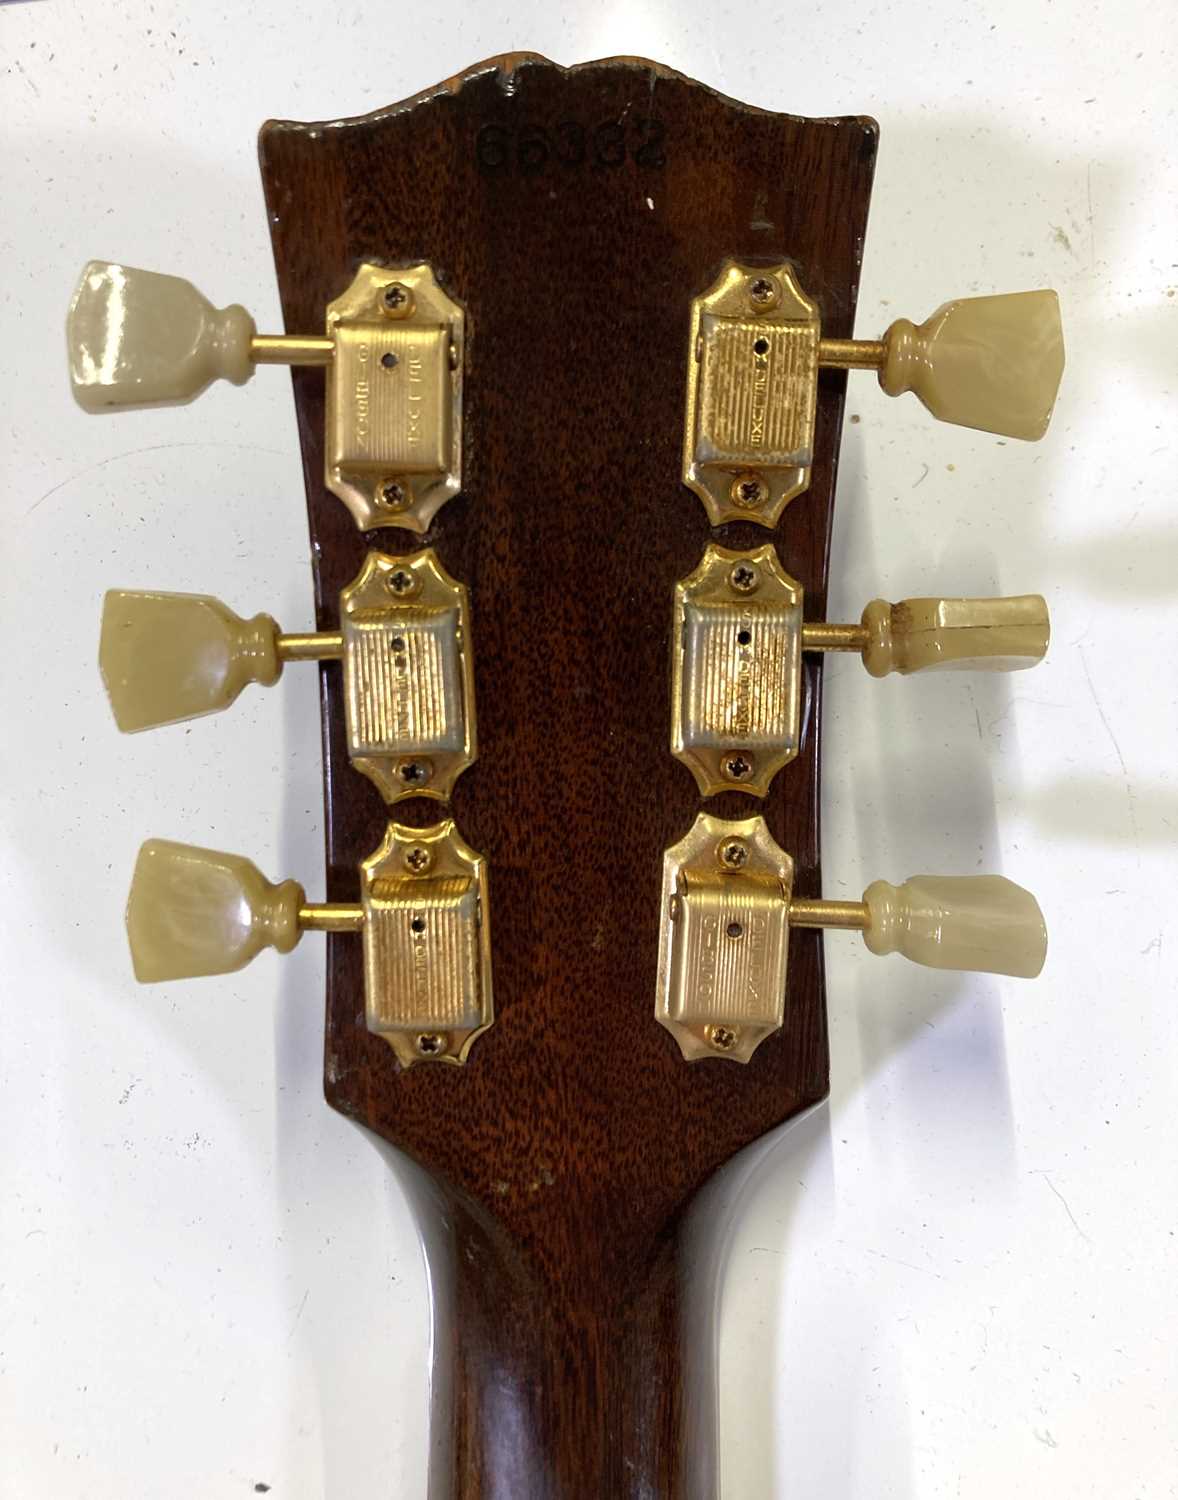 GIBSON - A 1964 ES345 STDV HOLLOW BODY ELECTRIC GUITAR. - Image 26 of 29